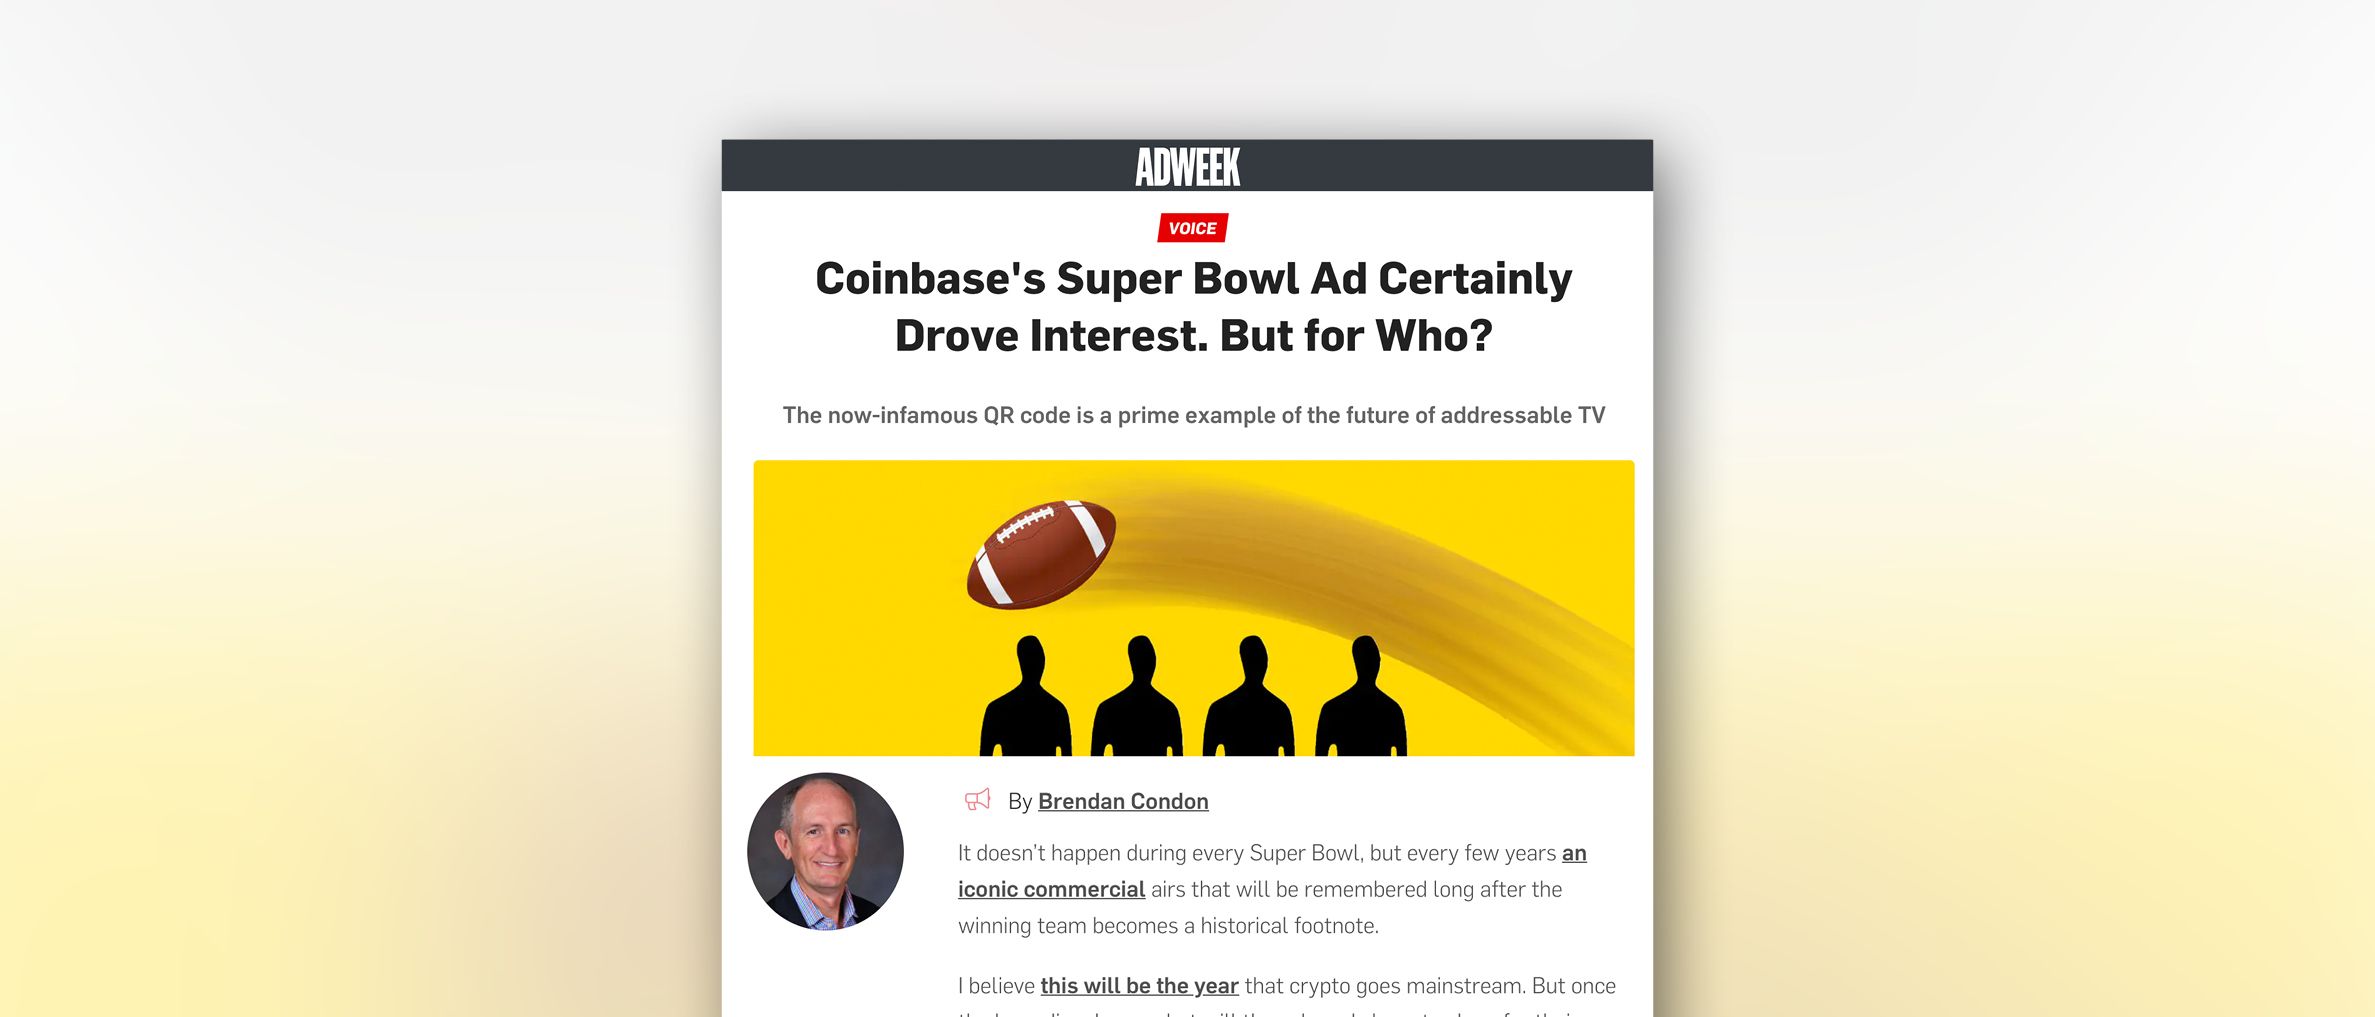 Adweek: Captify’s Global CRO, Brendan Condon—Coinbase’s Super Bowl Ad Certainly Drove Interest. But for Who?